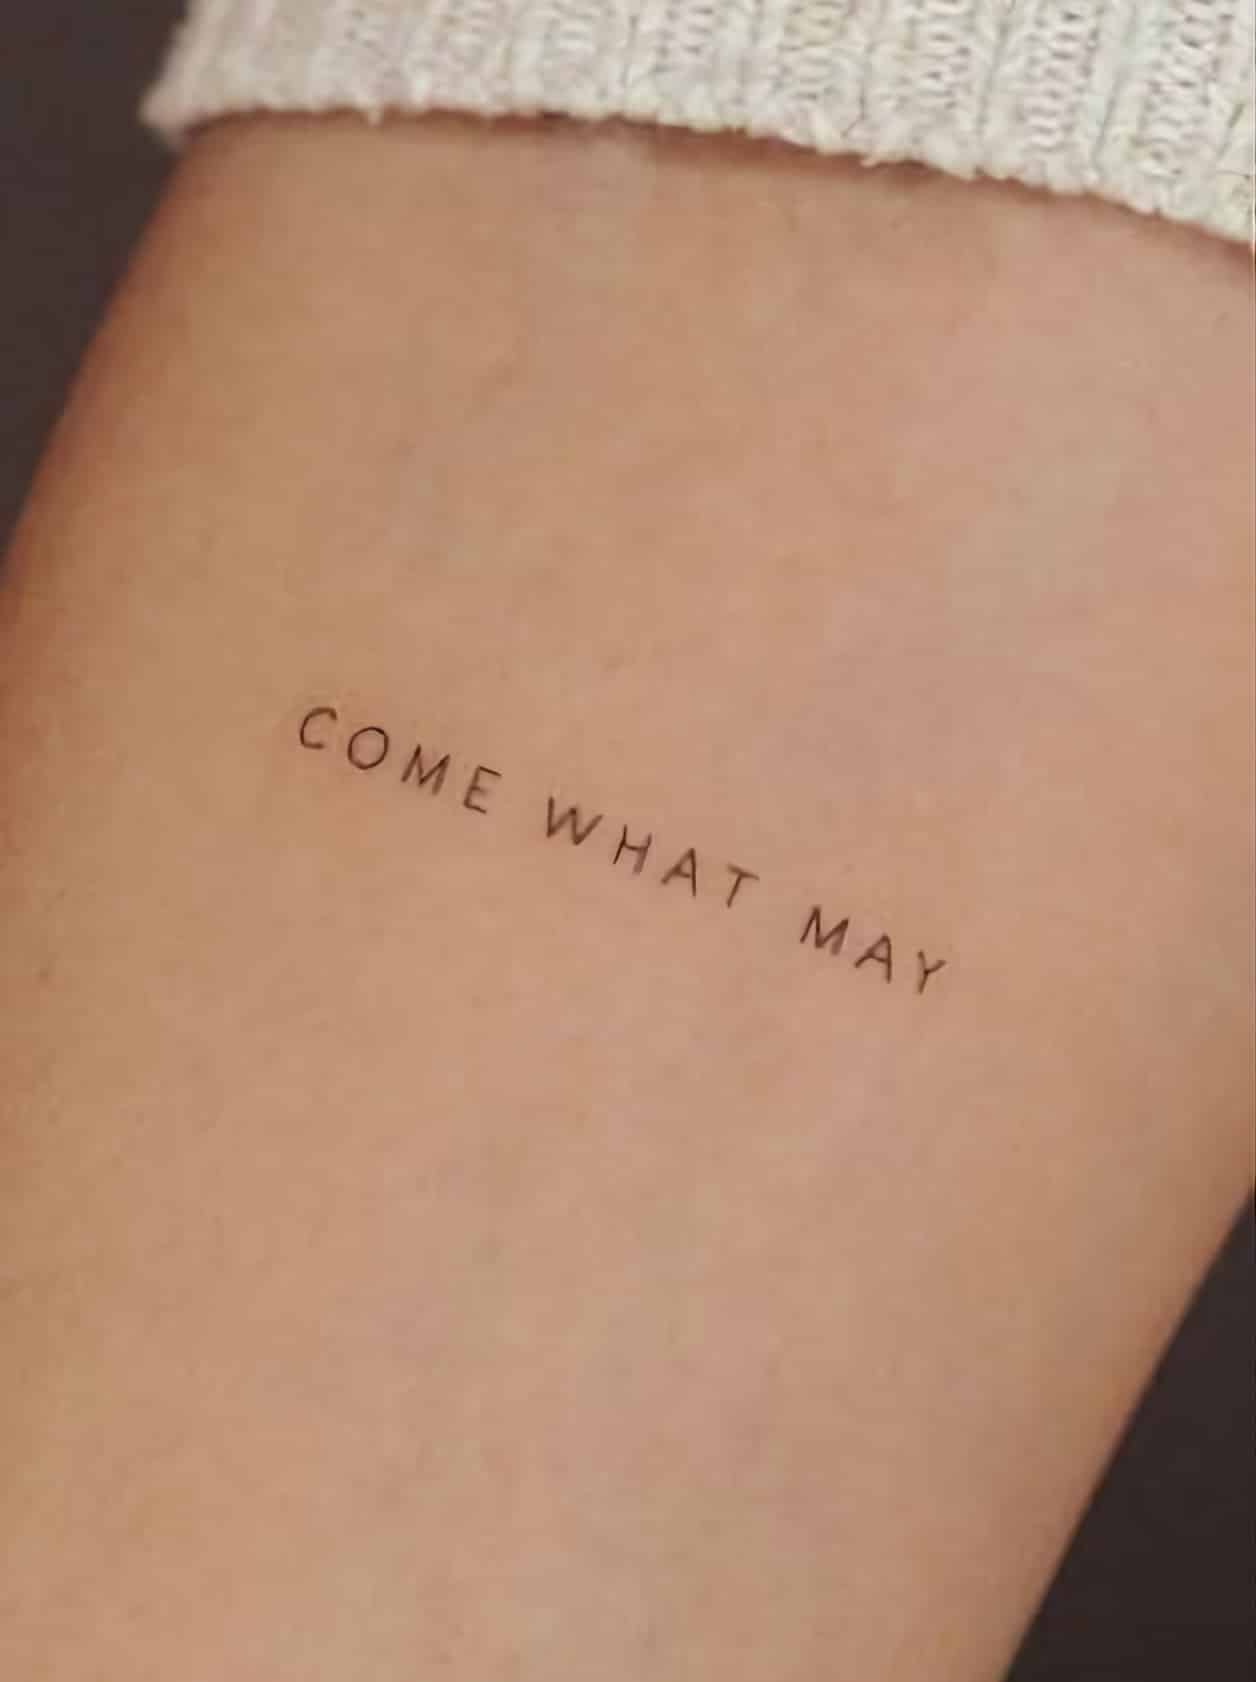 Frases para tatuarse - Come what may